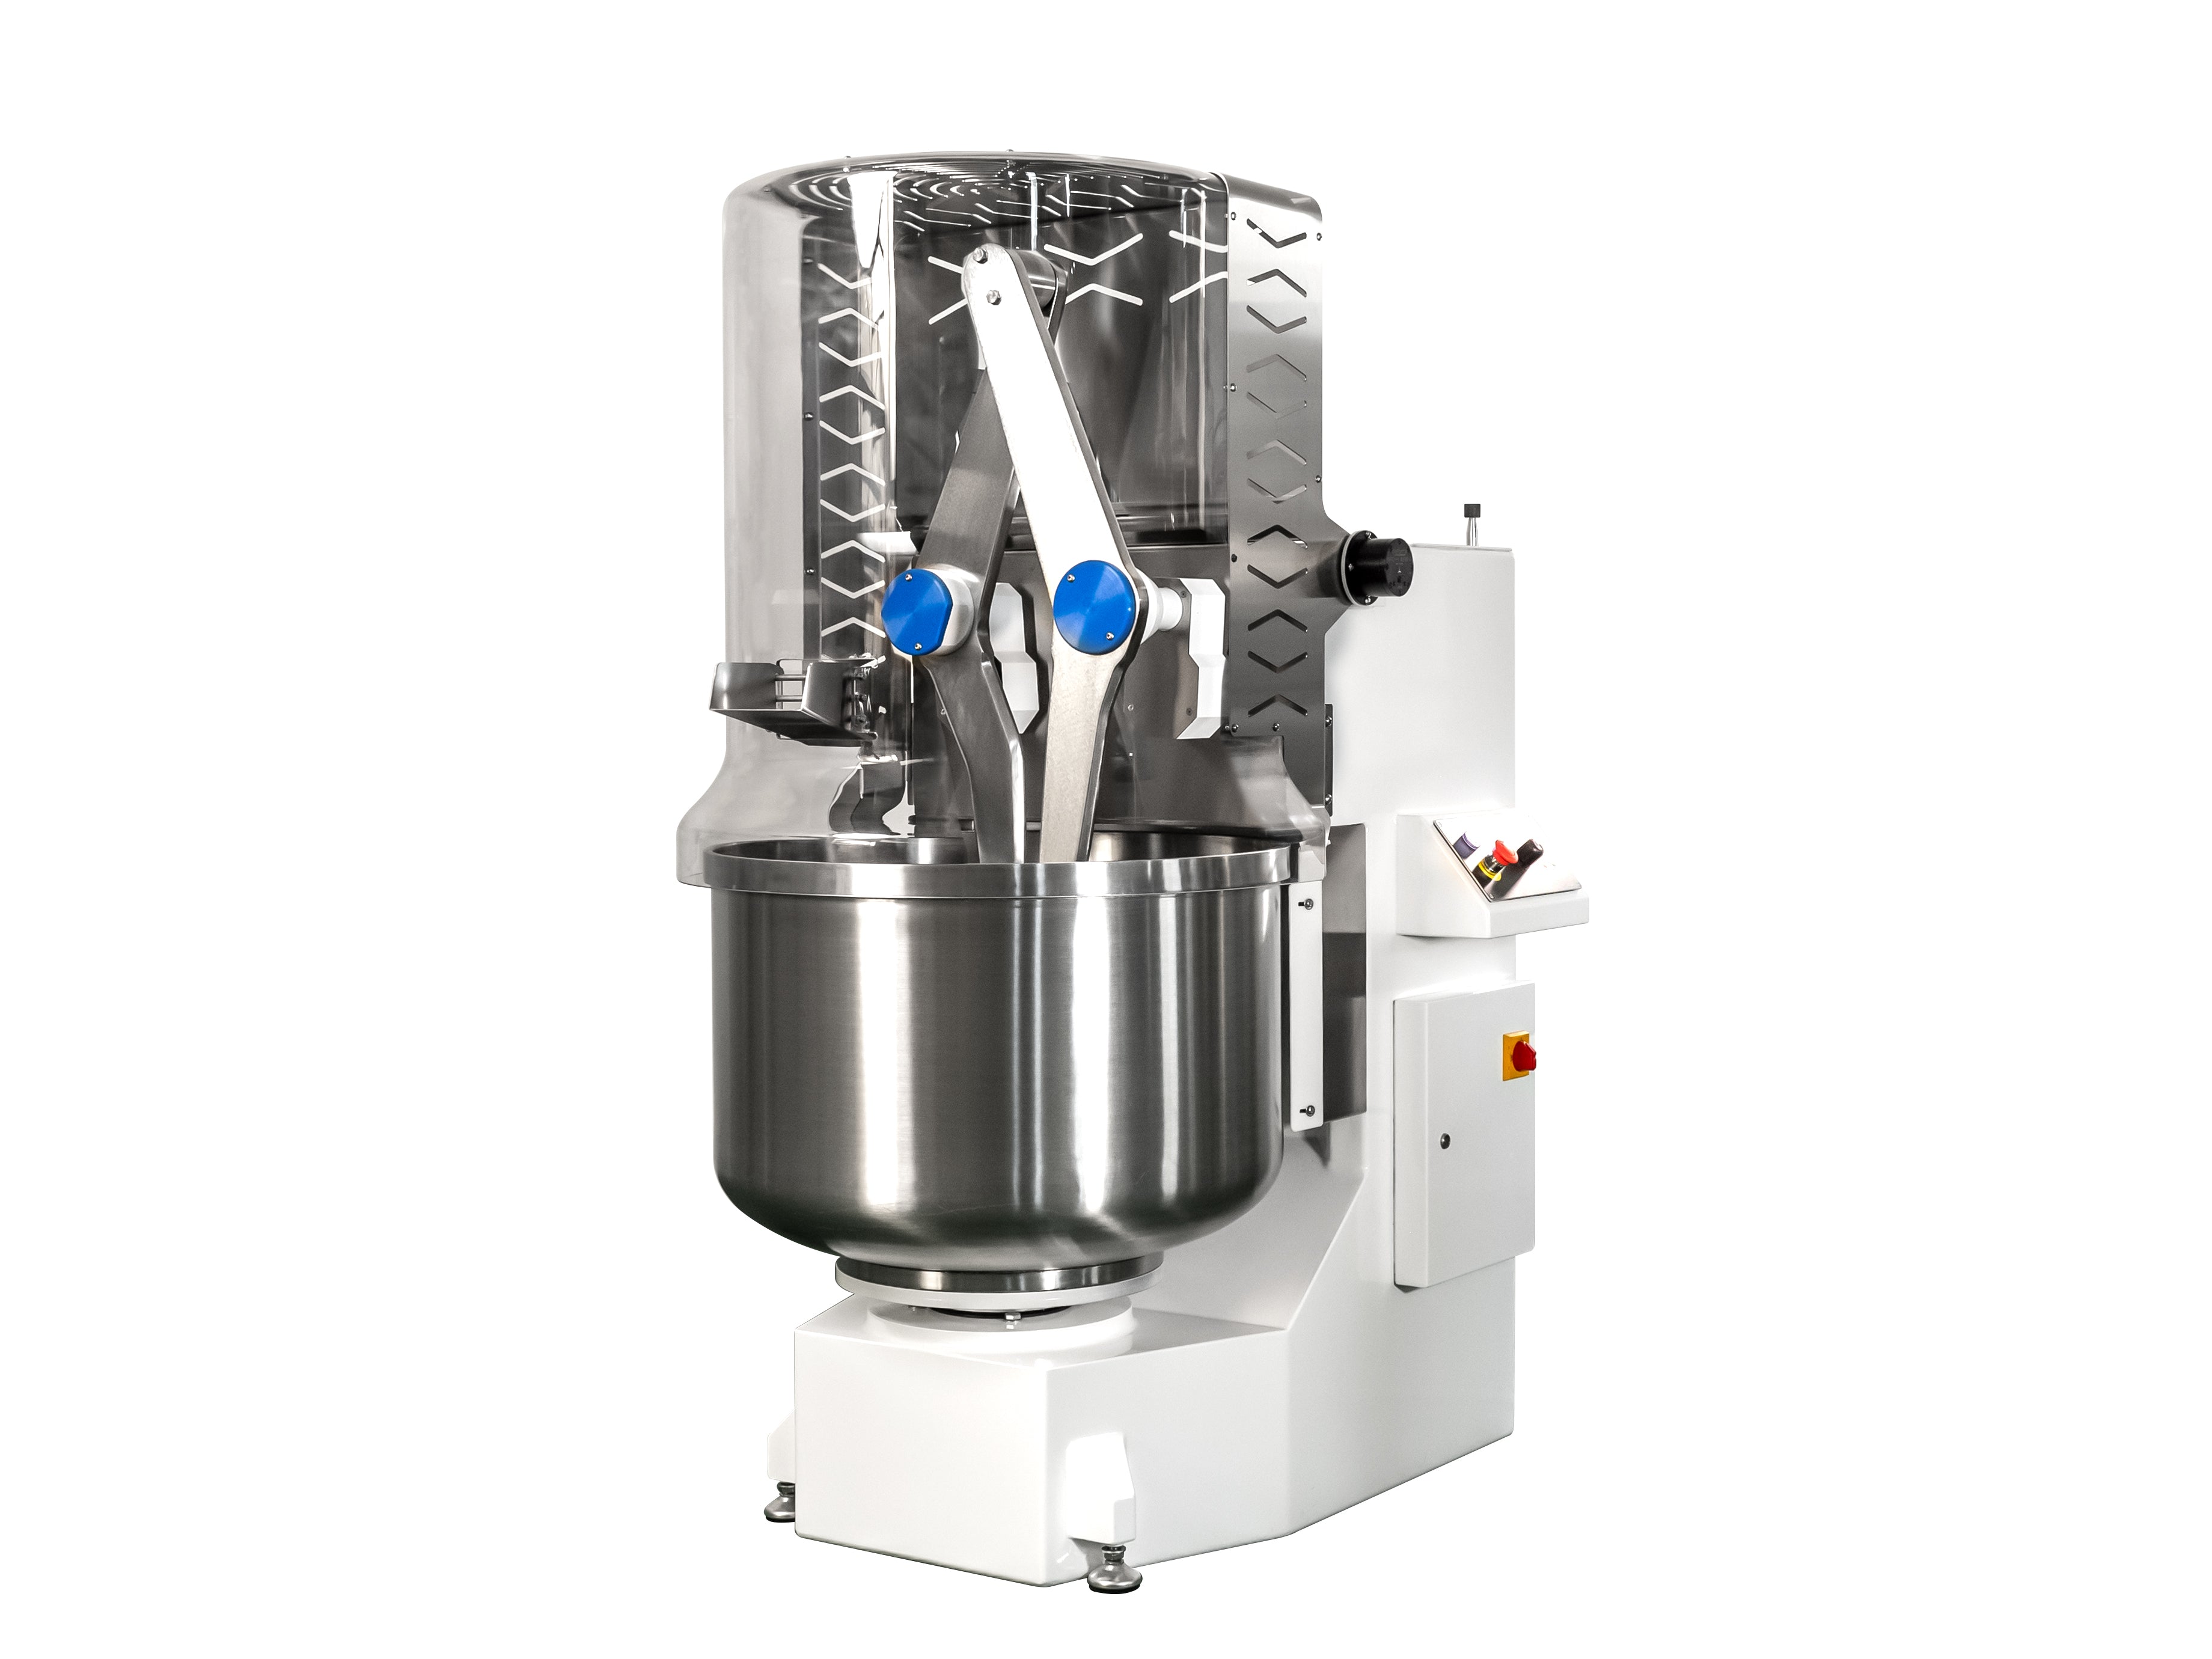 Why an AMPTO Twin Diving Arms Mixer ?